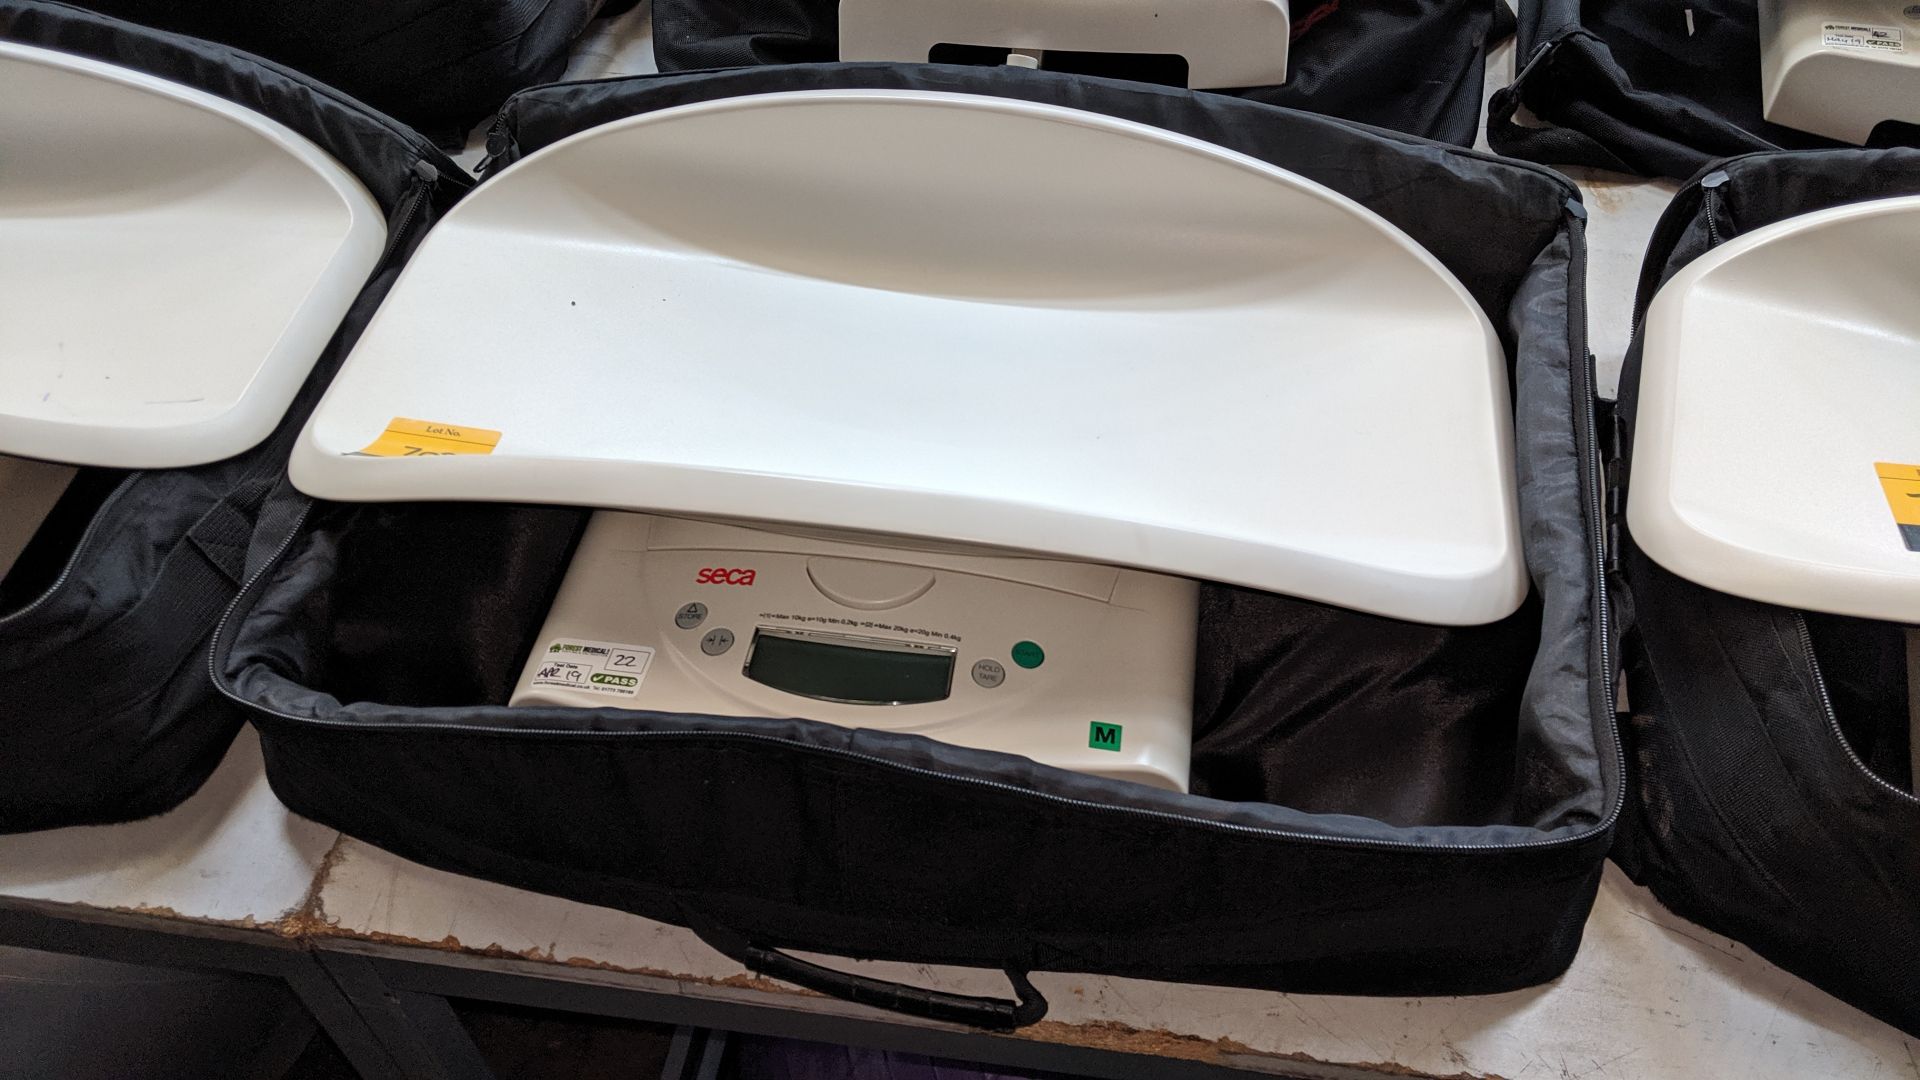 Seca model 384 baby scales max. capacity 20kg. This is one of a large number of lots used/owned by